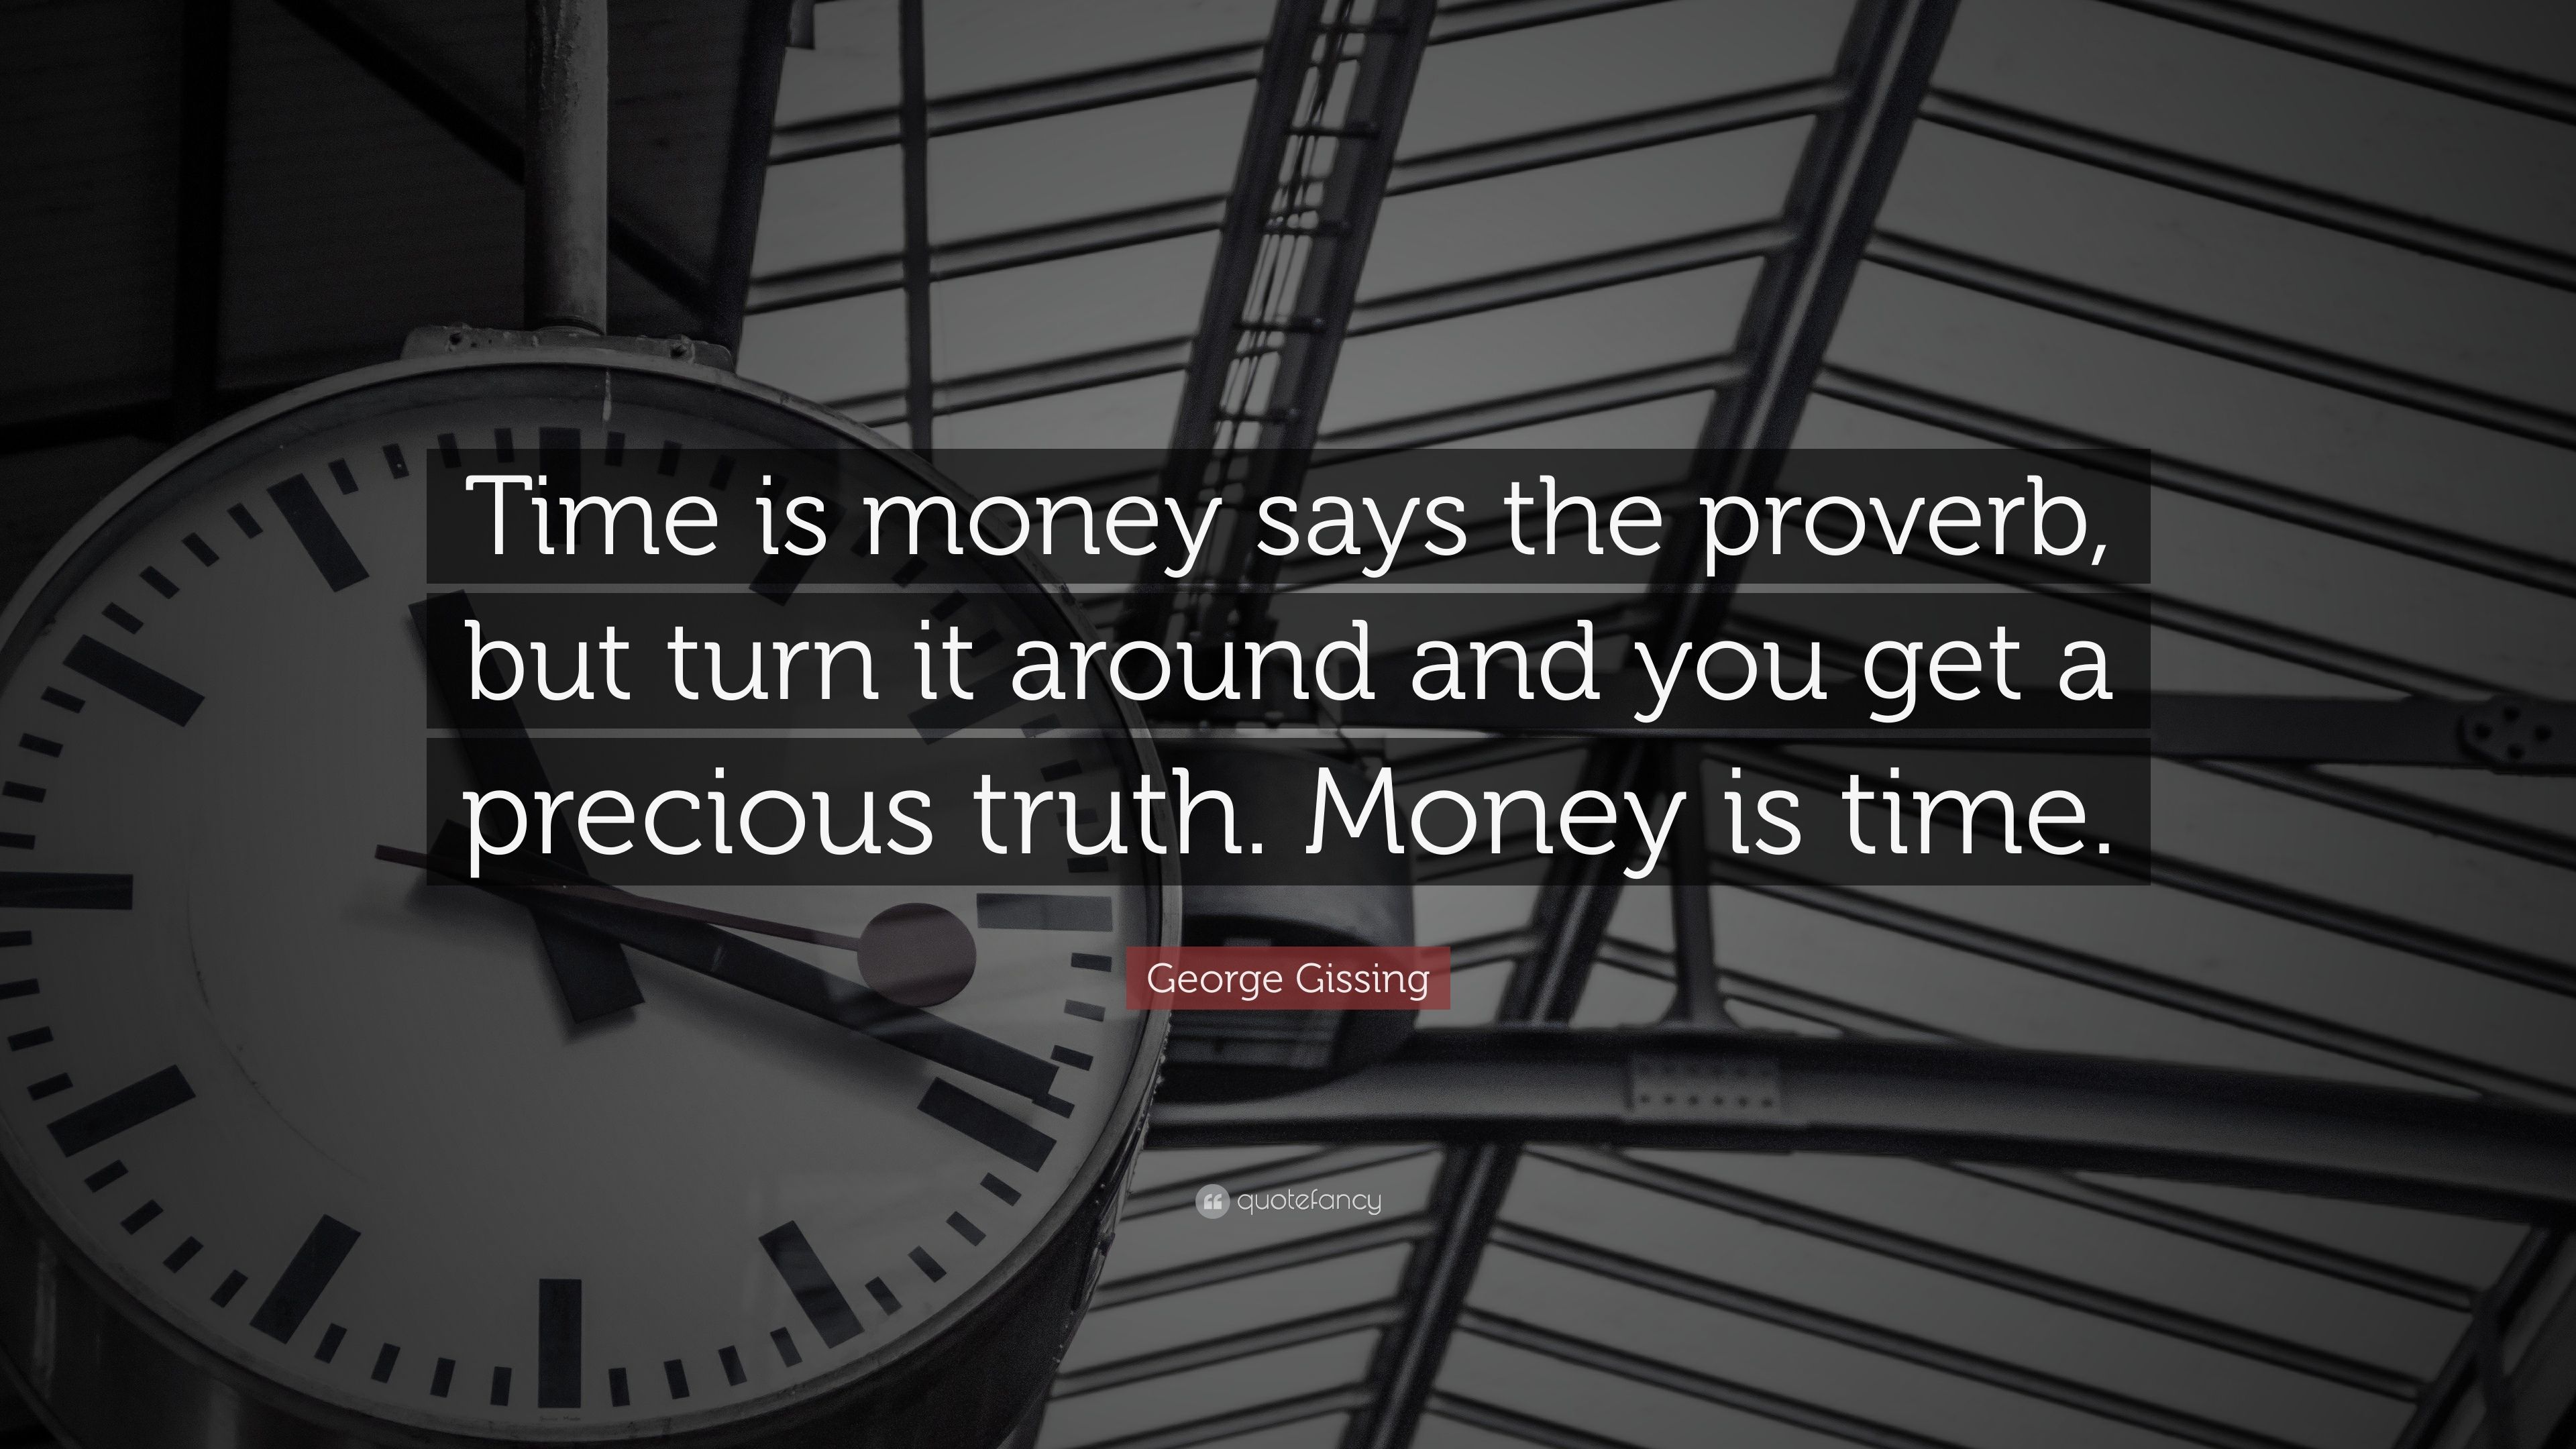 George Gissing Quote: "Time is money says the proverb, but turn it aro...